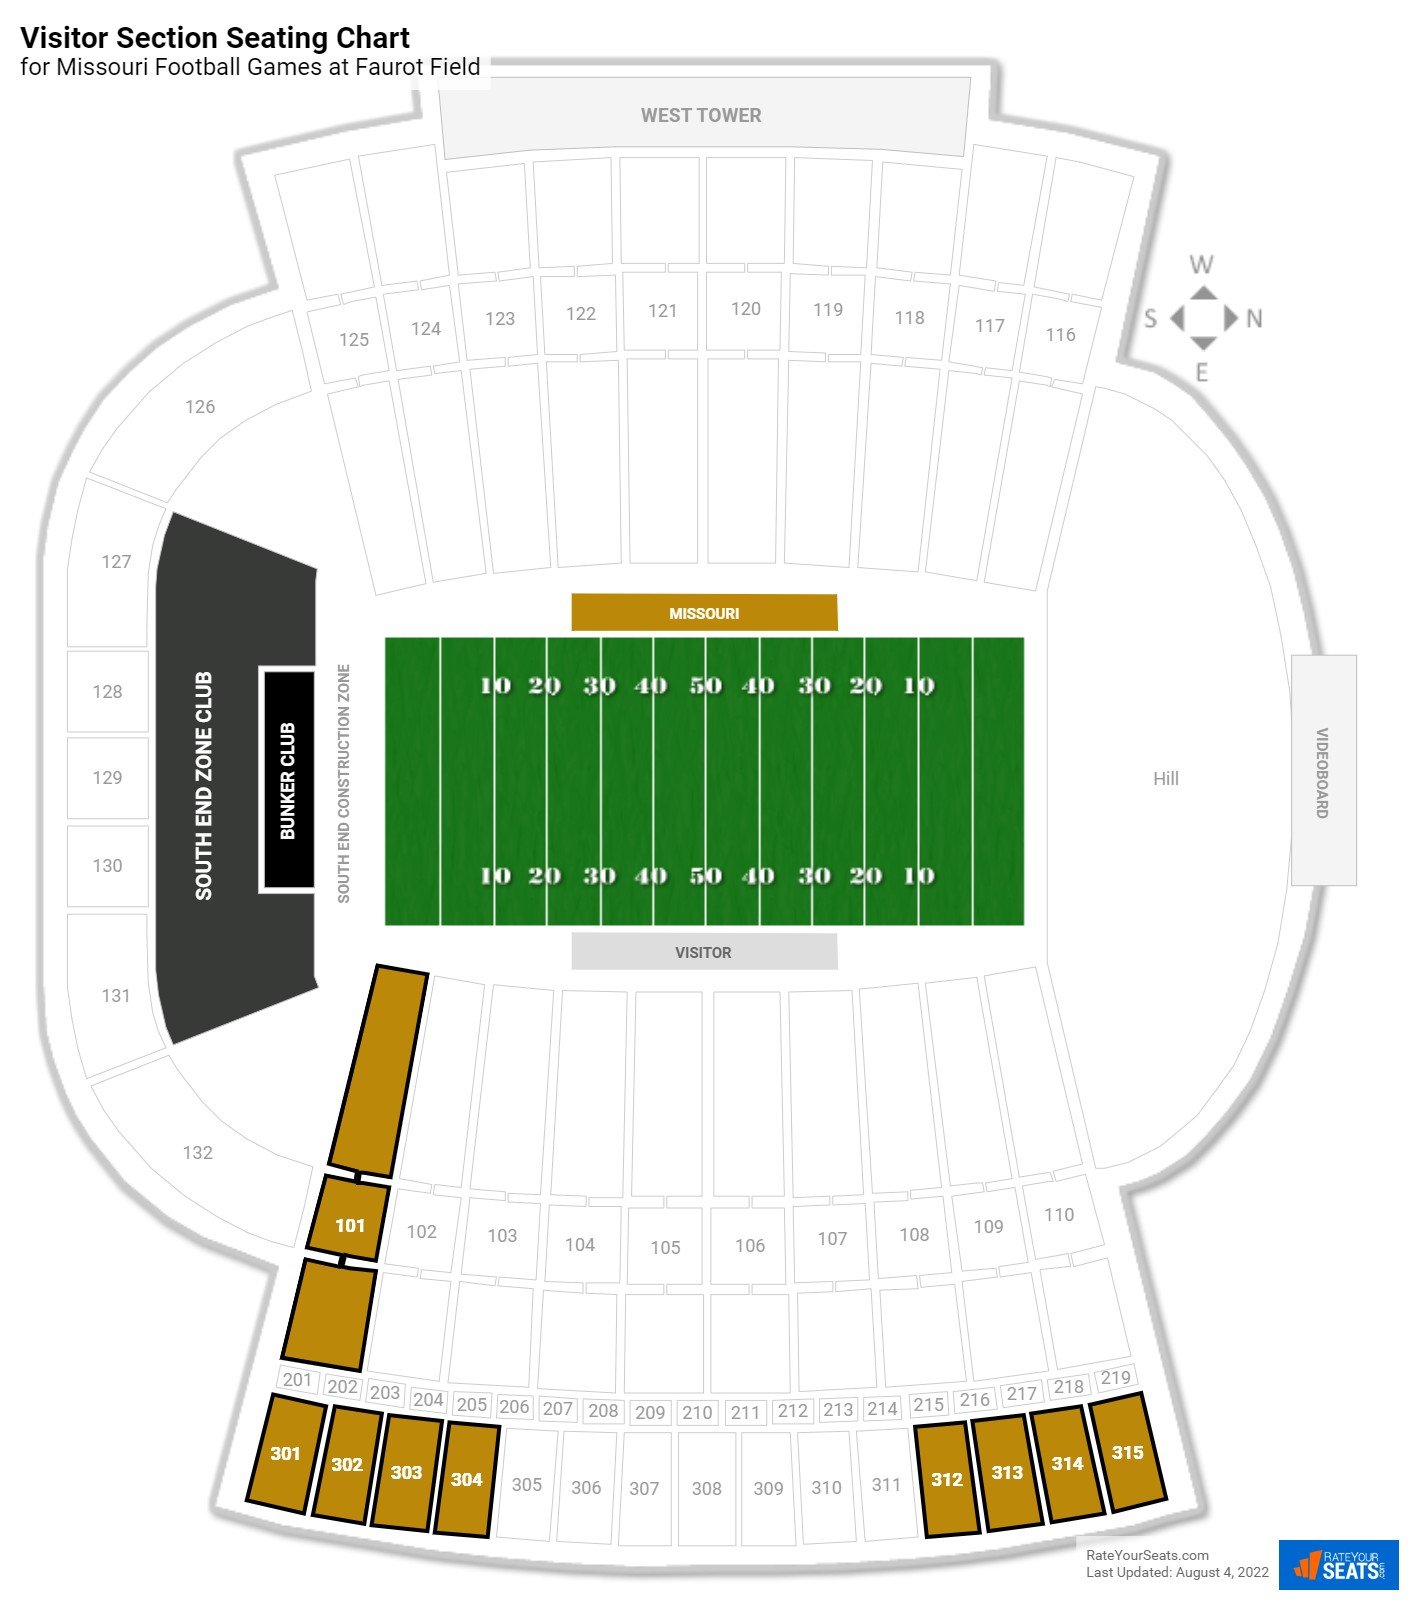 Missouri Visitor Section Seating Chart at Faurot Field